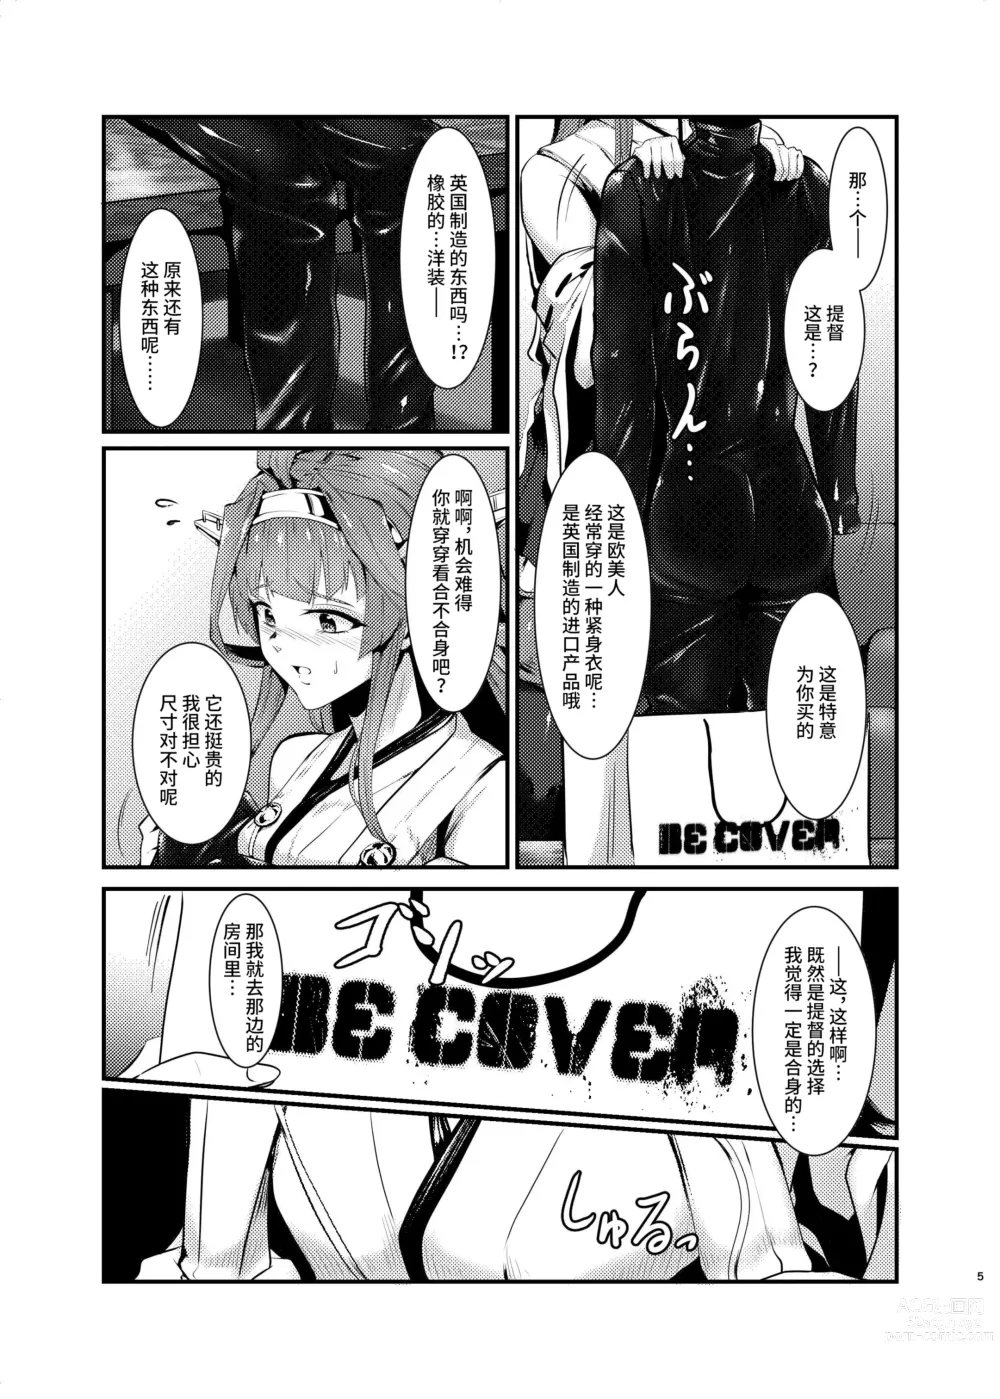 Page 5 of doujinshi Cover me!